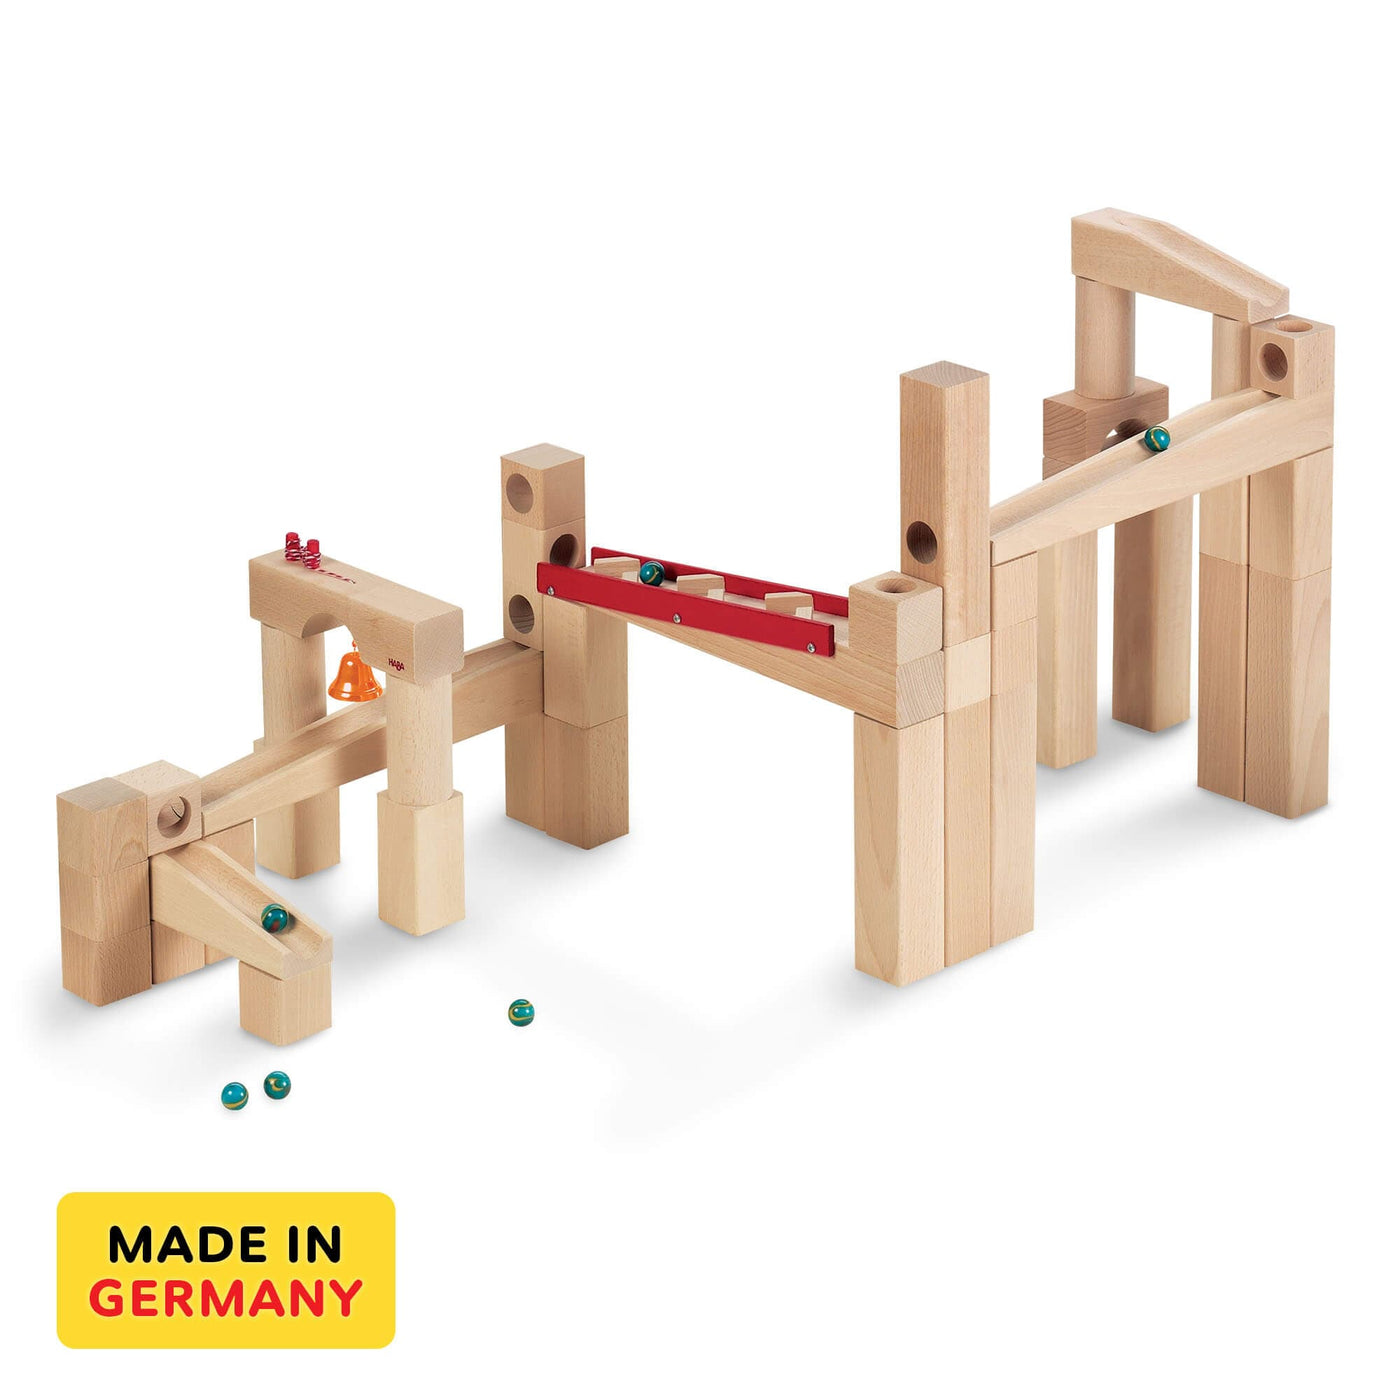 HABA Wooden Marble Run Ball Track Set Made in Germany